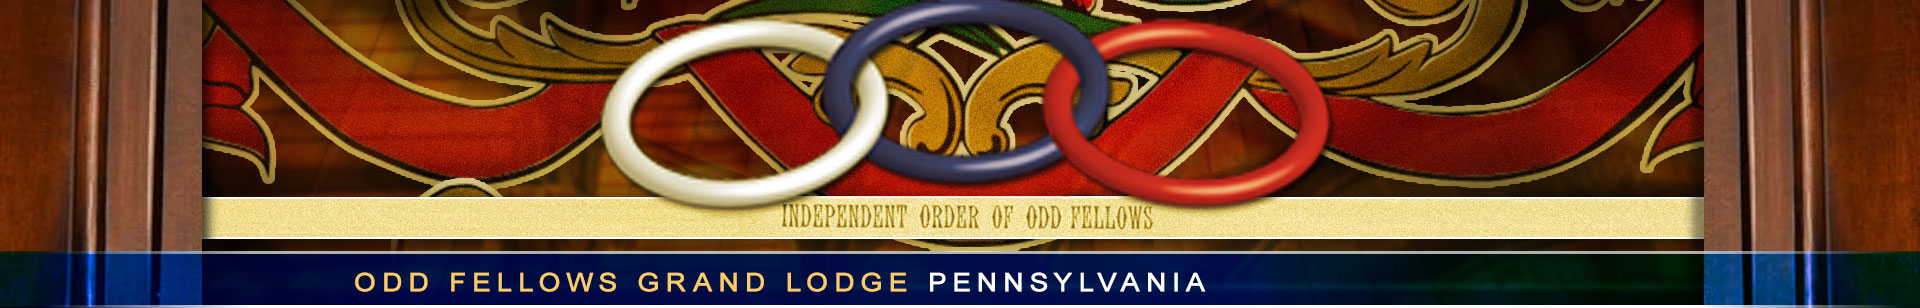 The Pre 1900 History of the odd fellows, PA Grand Lodge.